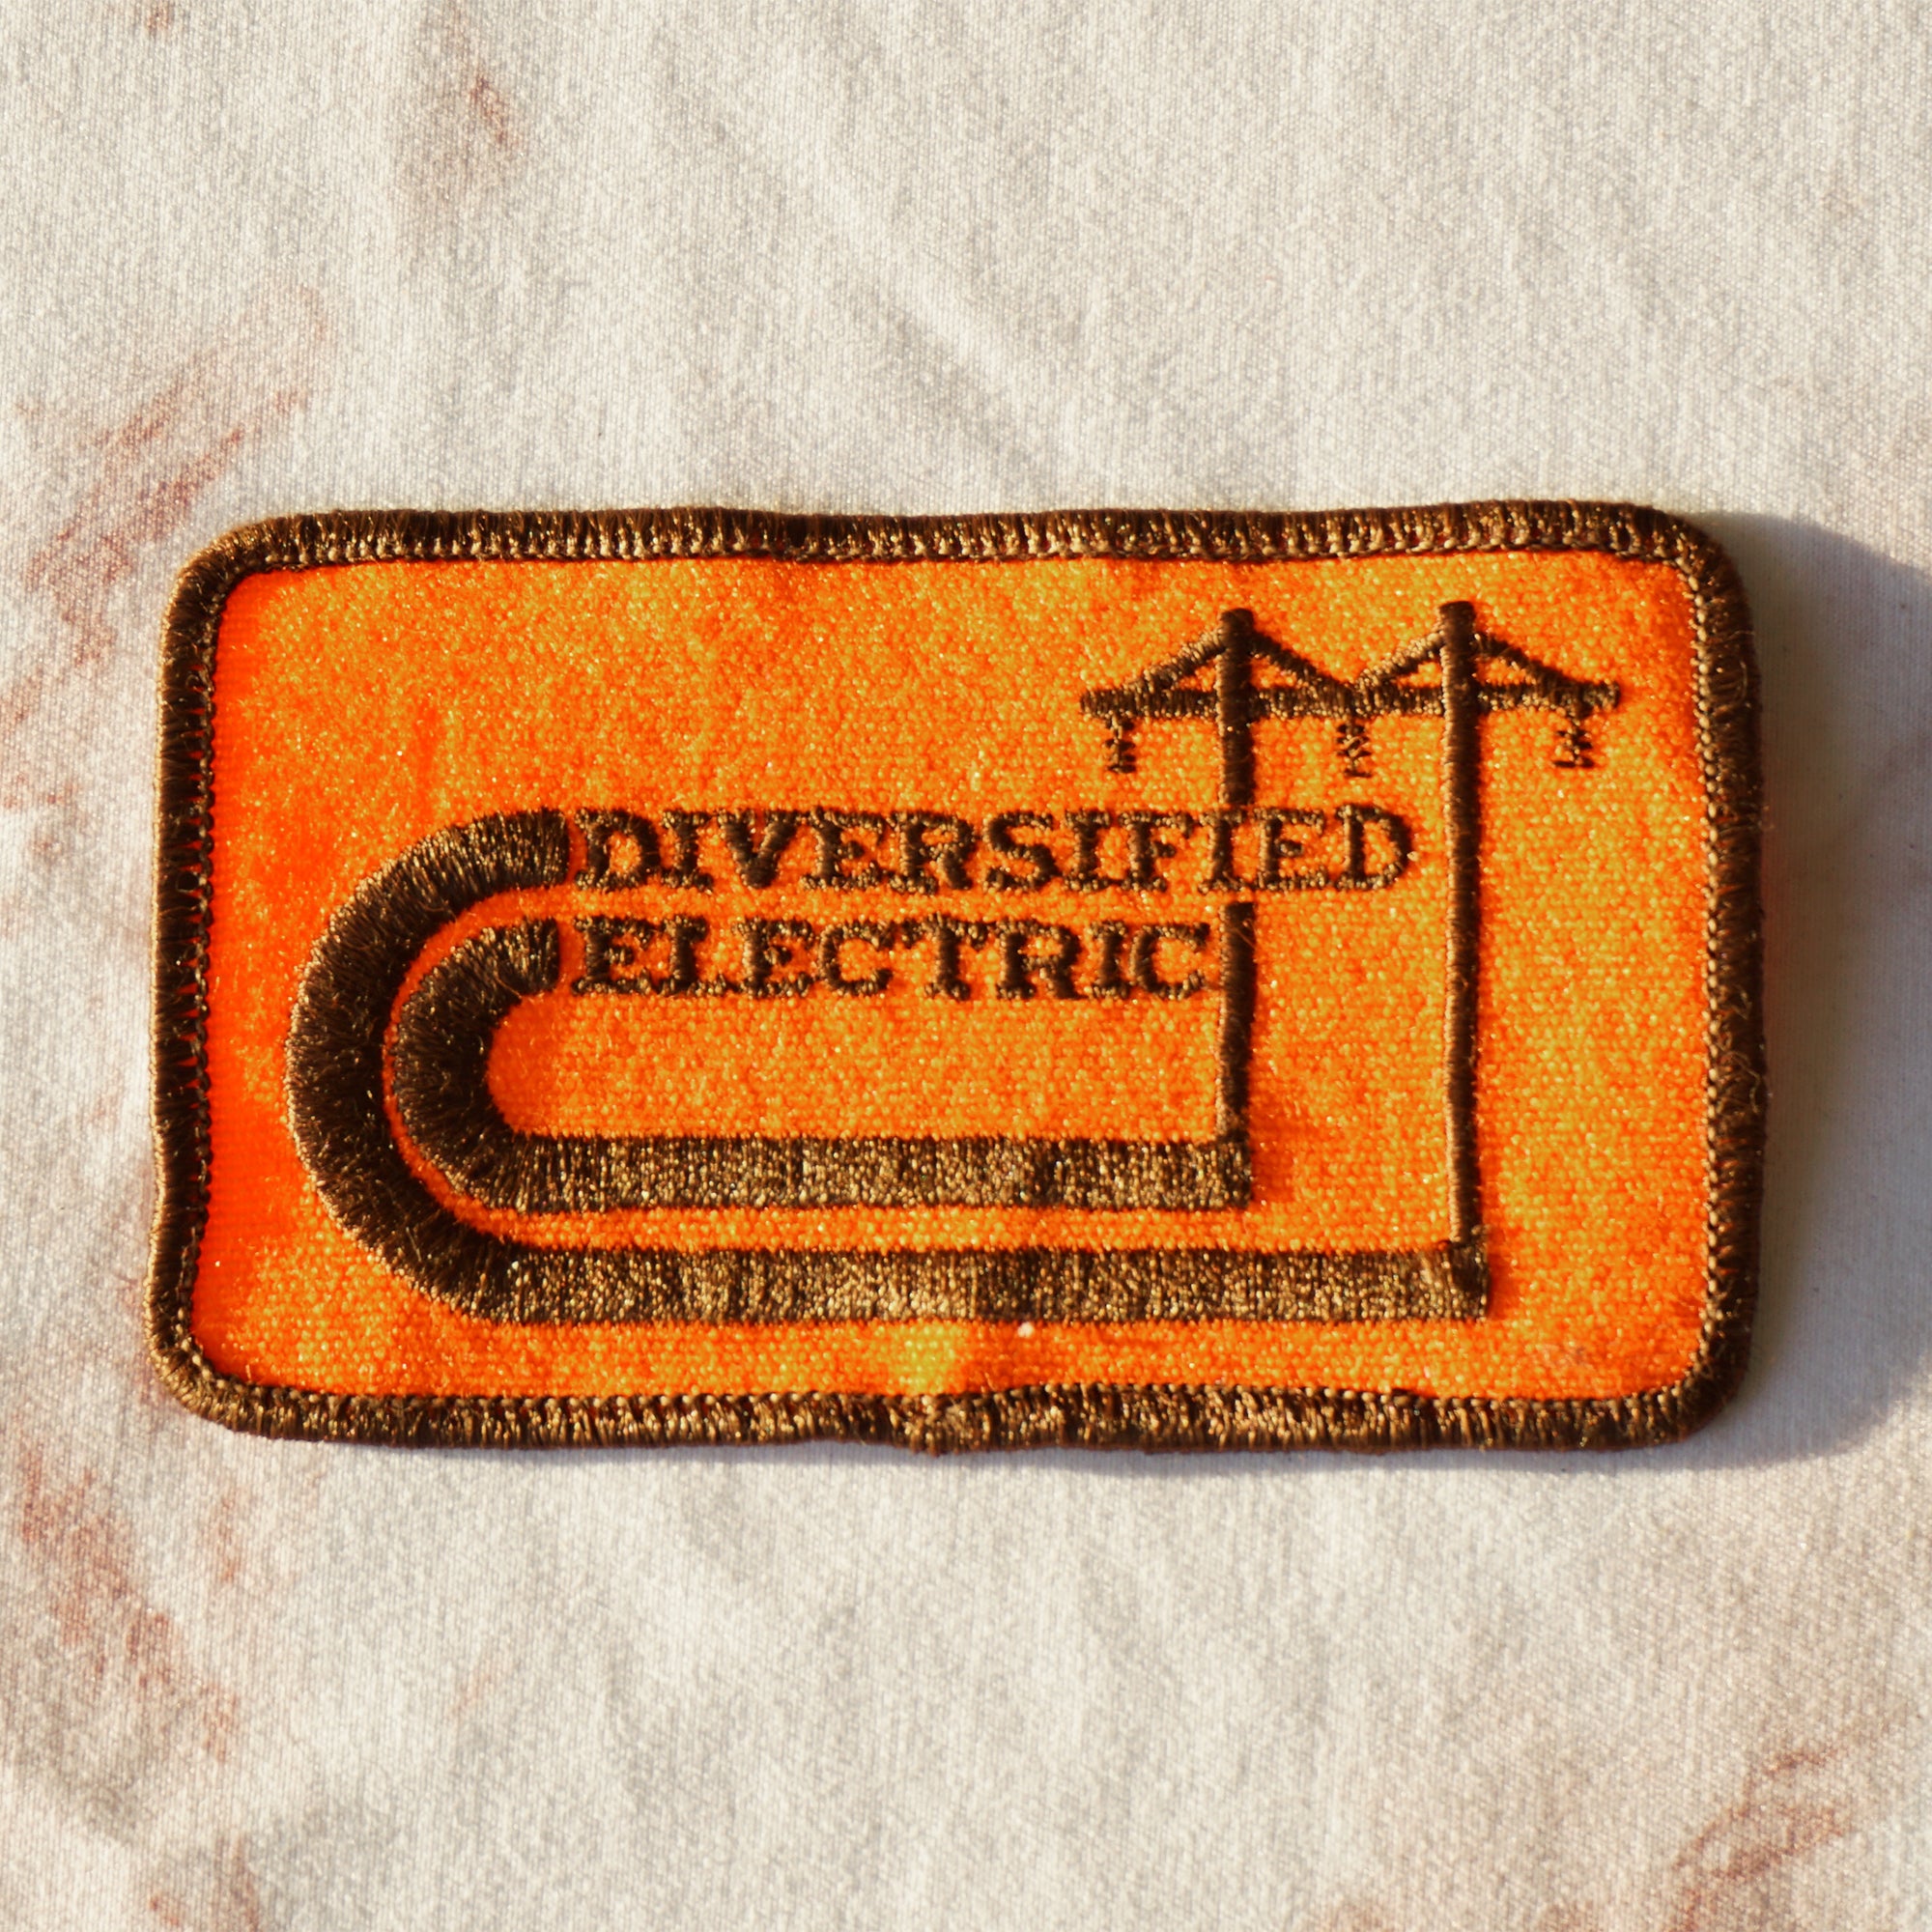 1980s Vintage 4" DIVERSIFIED ELECTRIC Clothing Patch. Orange and Brown Colors.